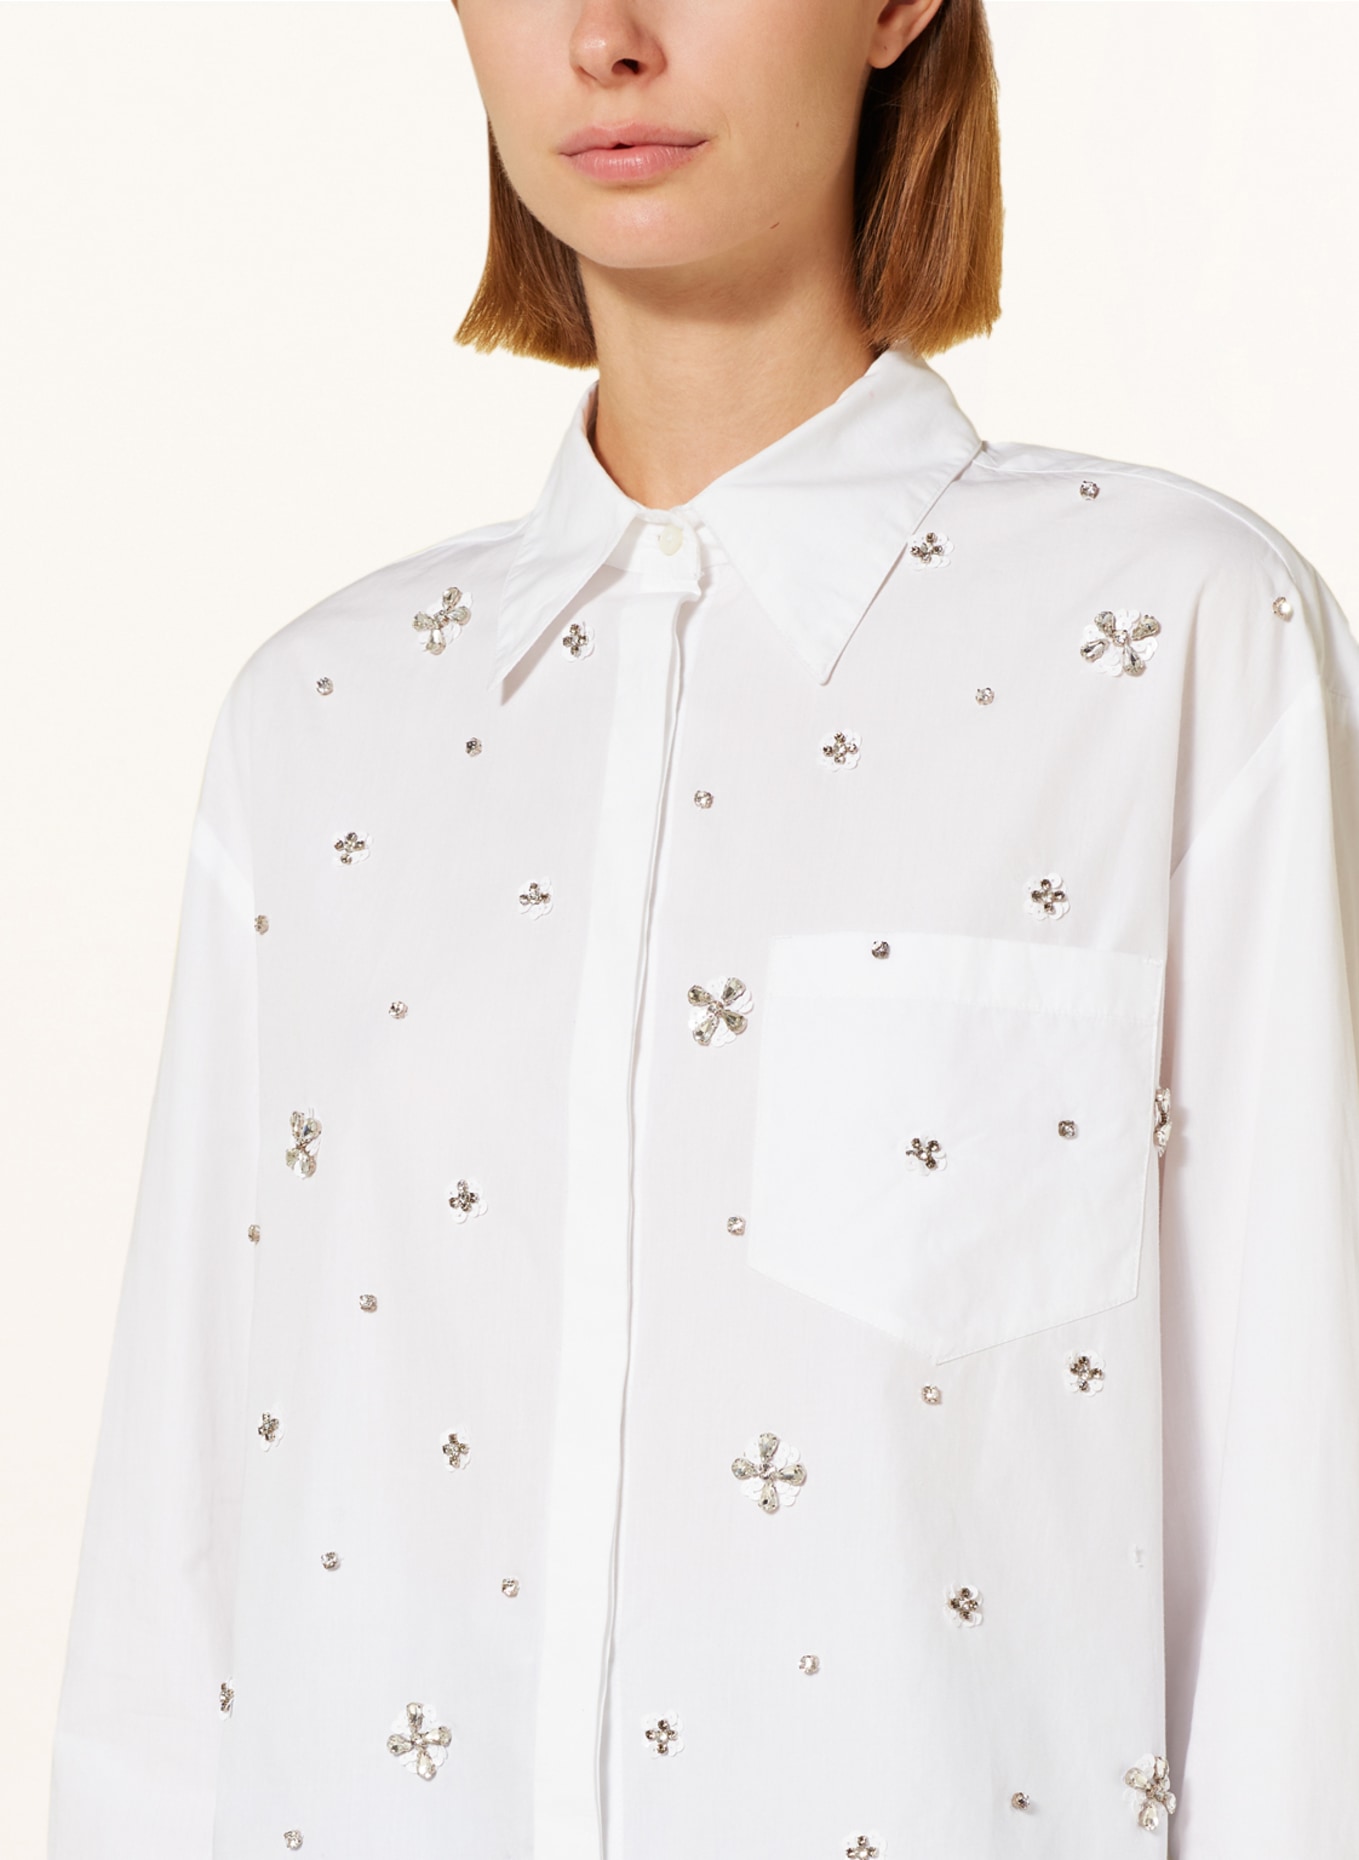 MAX & Co. Shirt blouse SORRISO with sequins and decorative gems, Color: WHITE (Image 4)